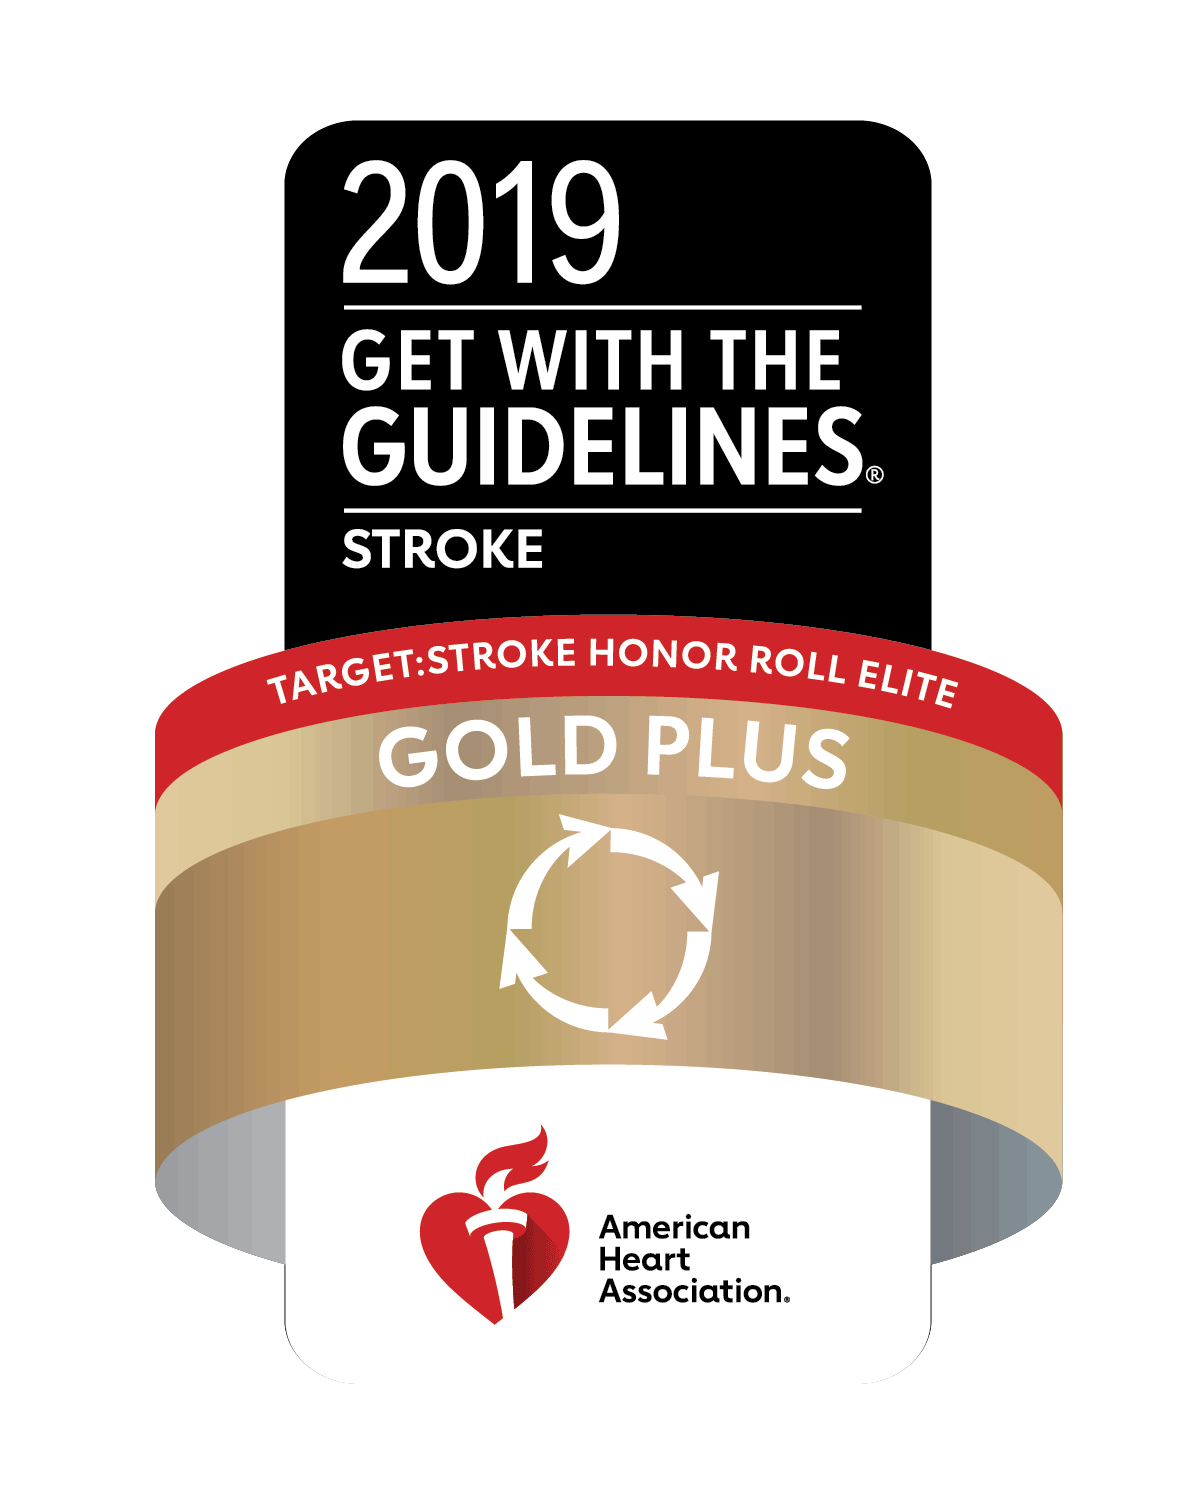 2019 Get with Guidelines Stroke, Gold Plus from the American Heart Association